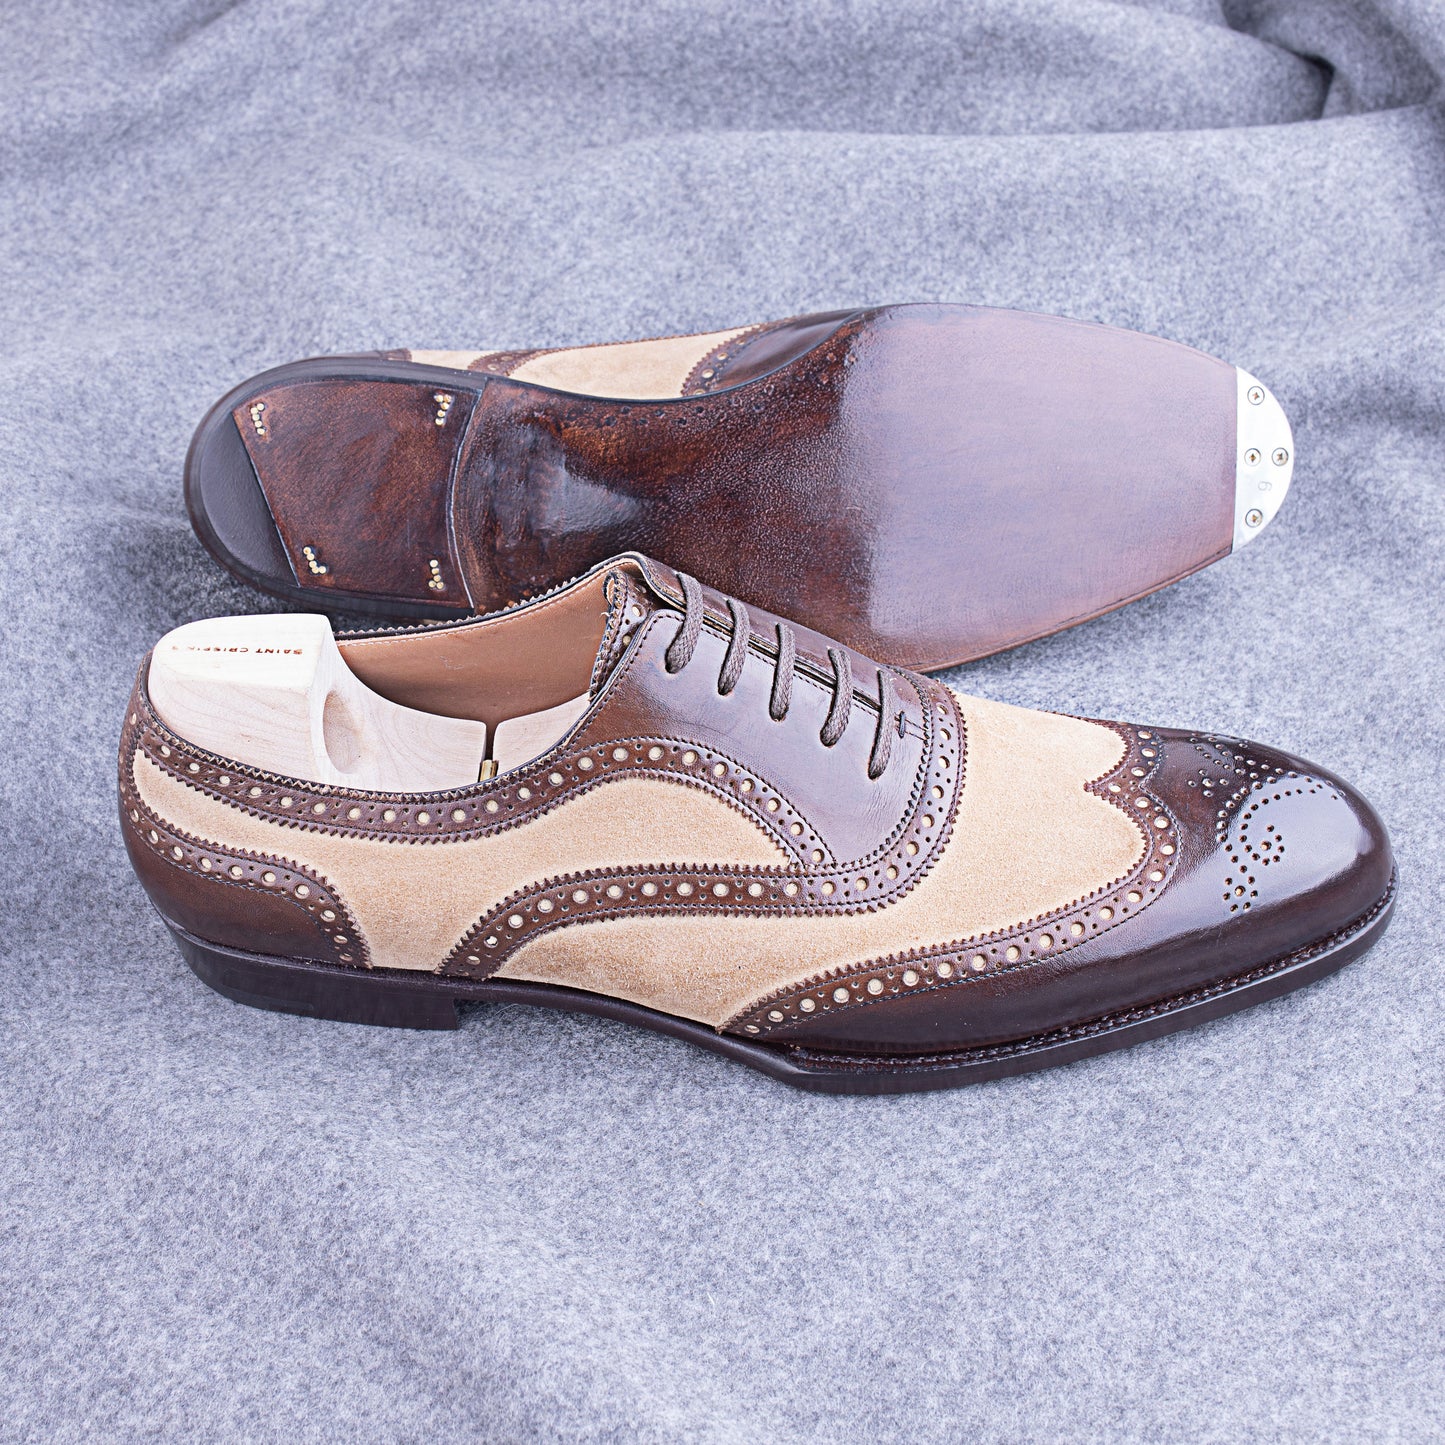 Oxford in leather and canvas, full brogueing, cuban heel